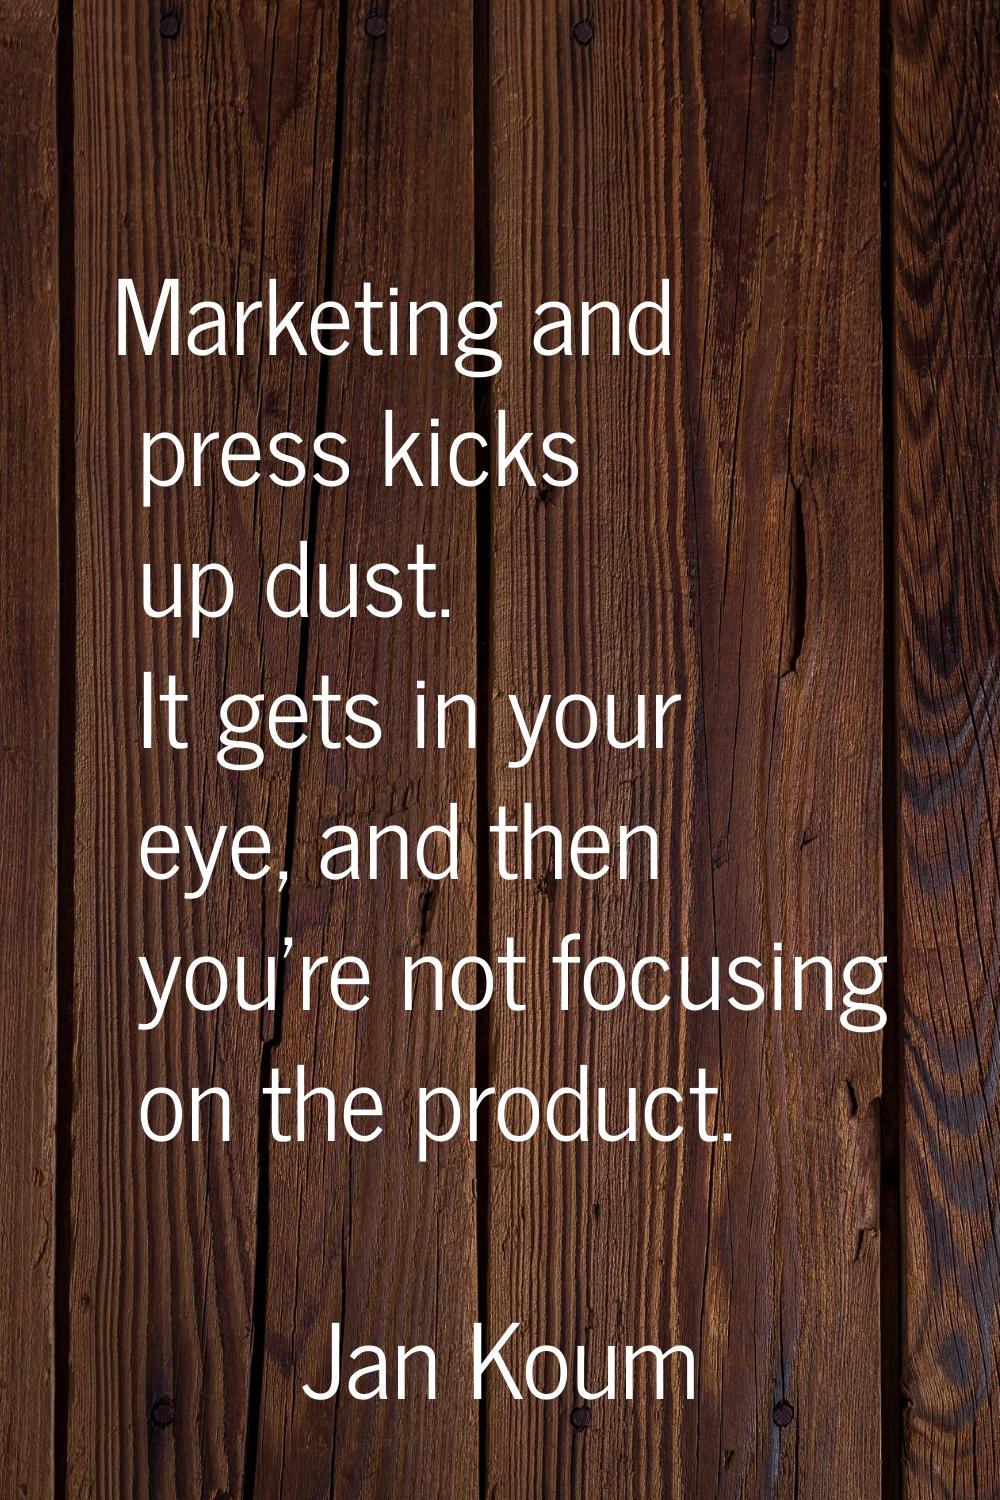 Marketing and press kicks up dust. It gets in your eye, and then you're not focusing on the product